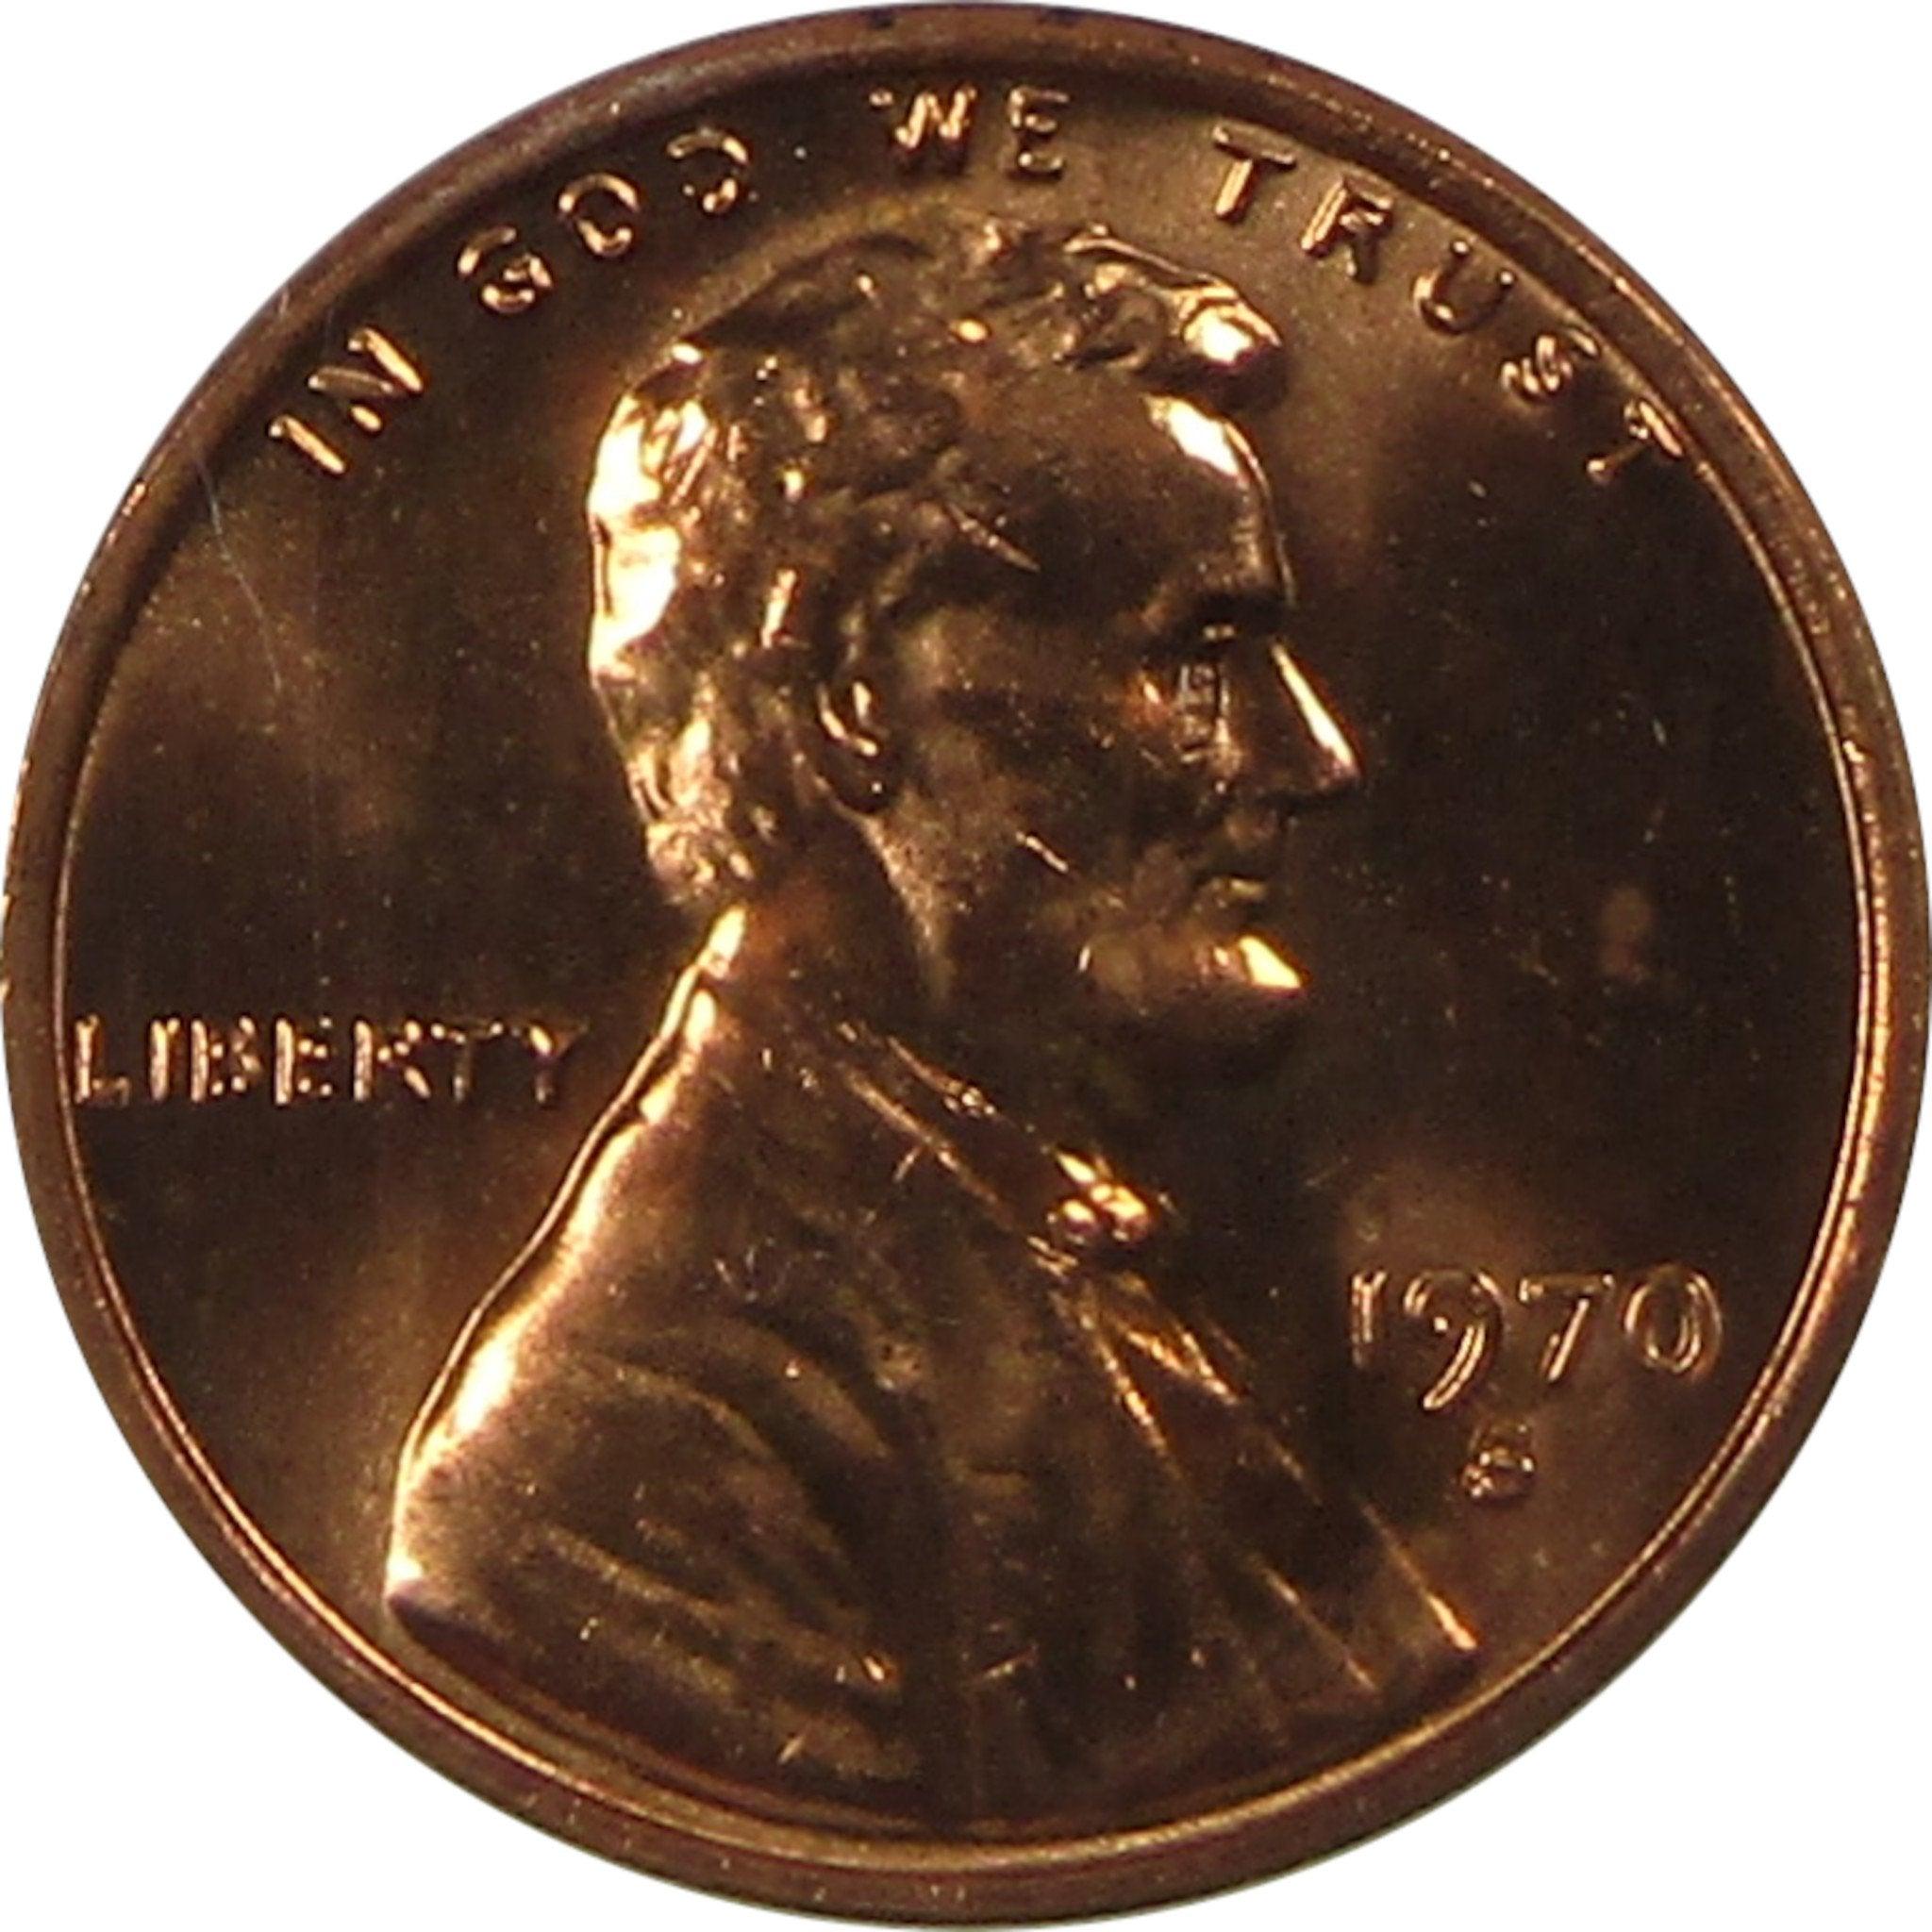 1970 S/S Lg Date Low 7 Lincoln Memorial Cent MS 65 ANACS SKU:CPC1083